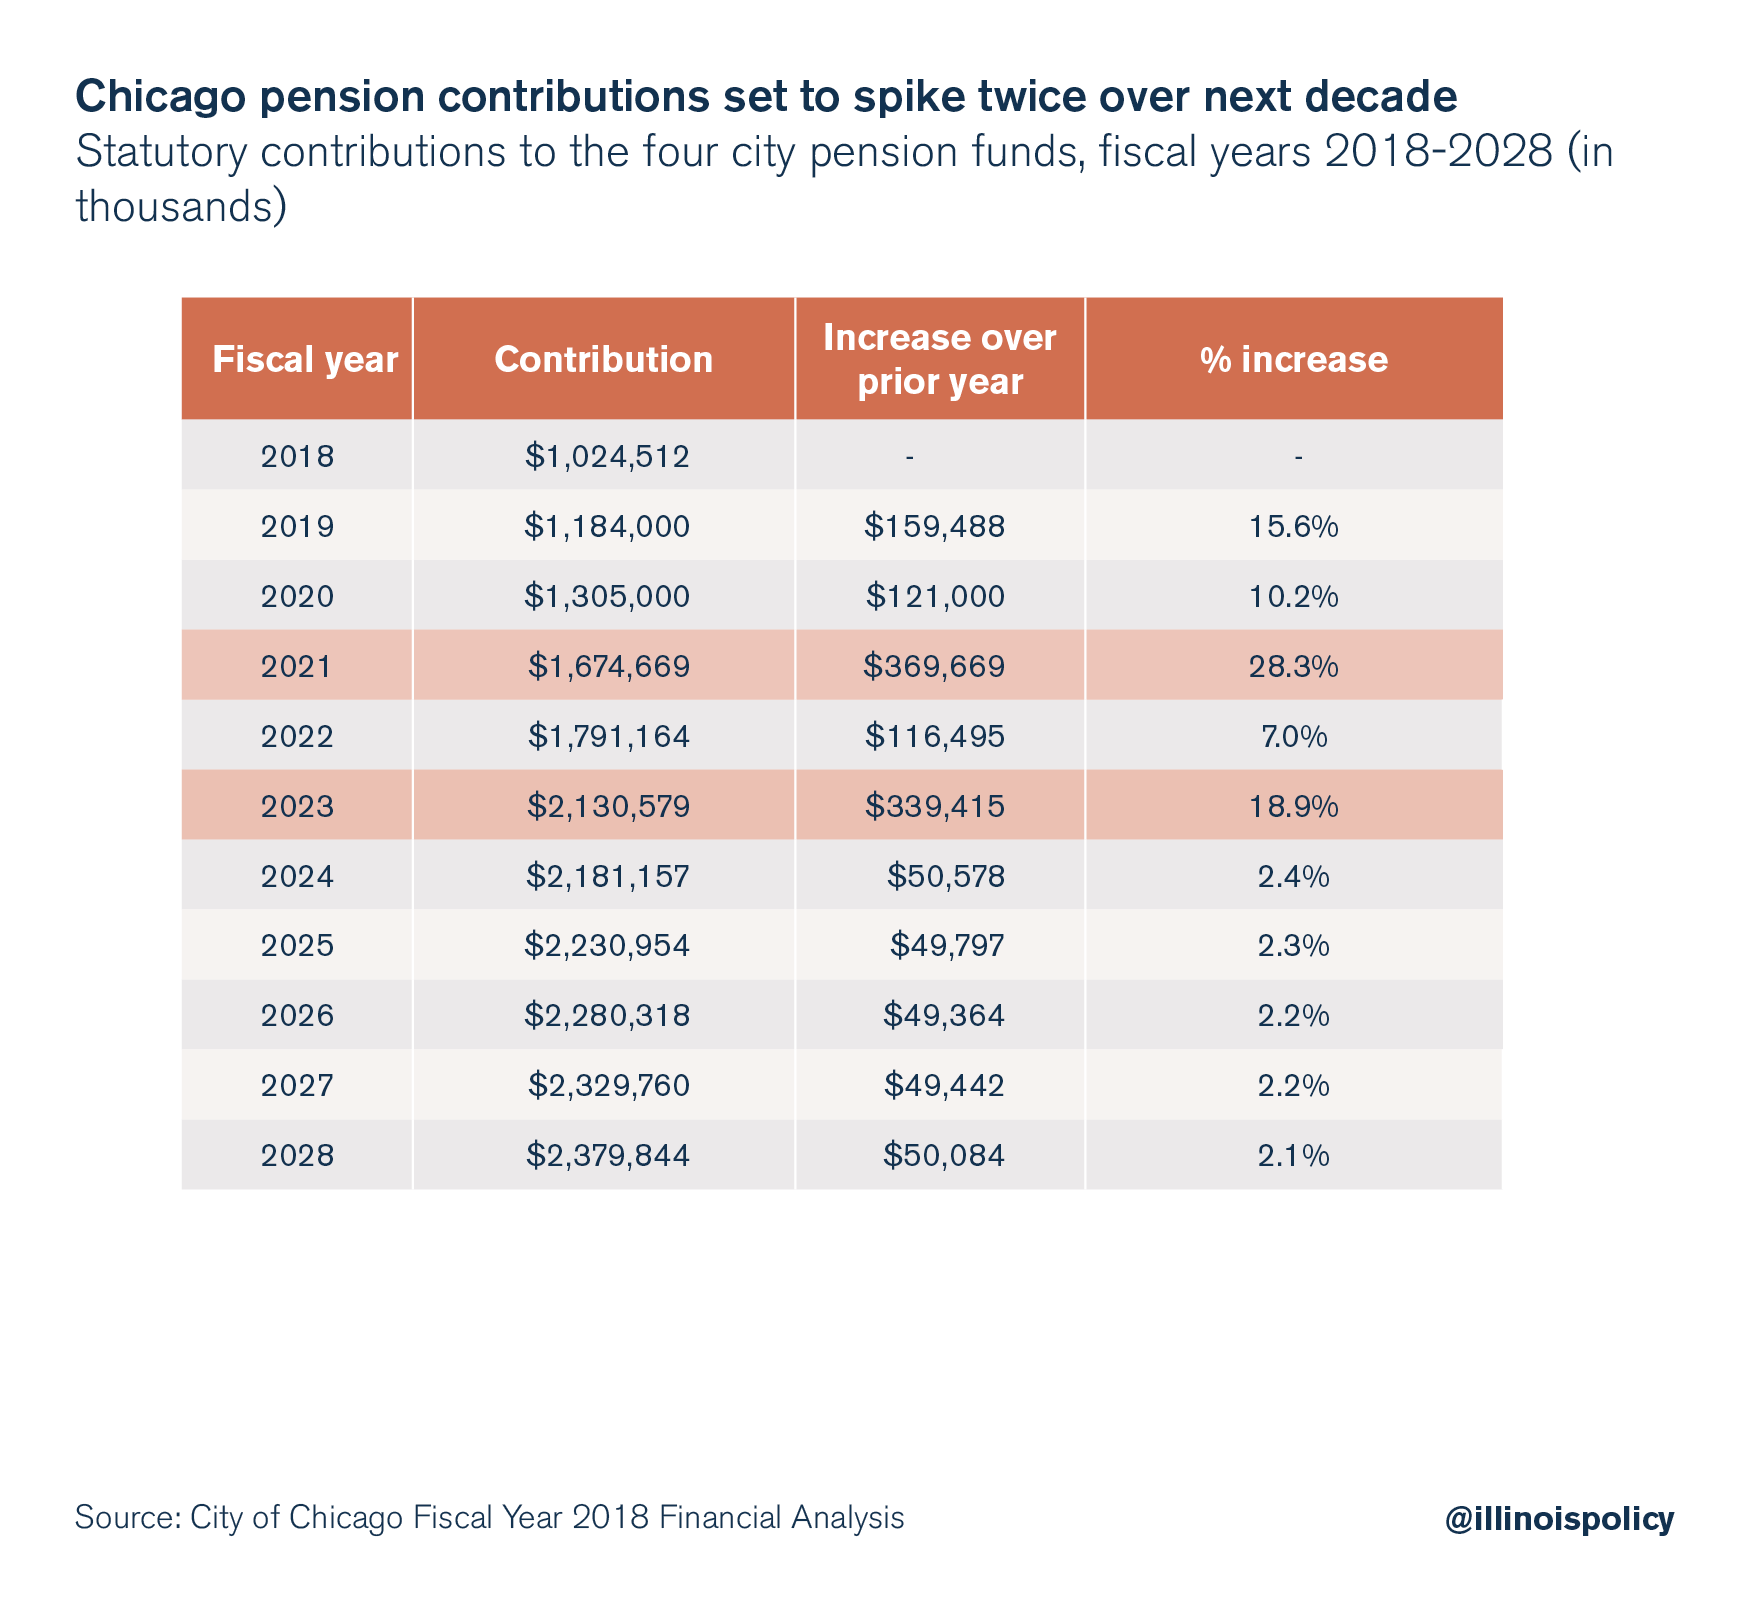 Chicago pension contributions set to spike twice over the next decade